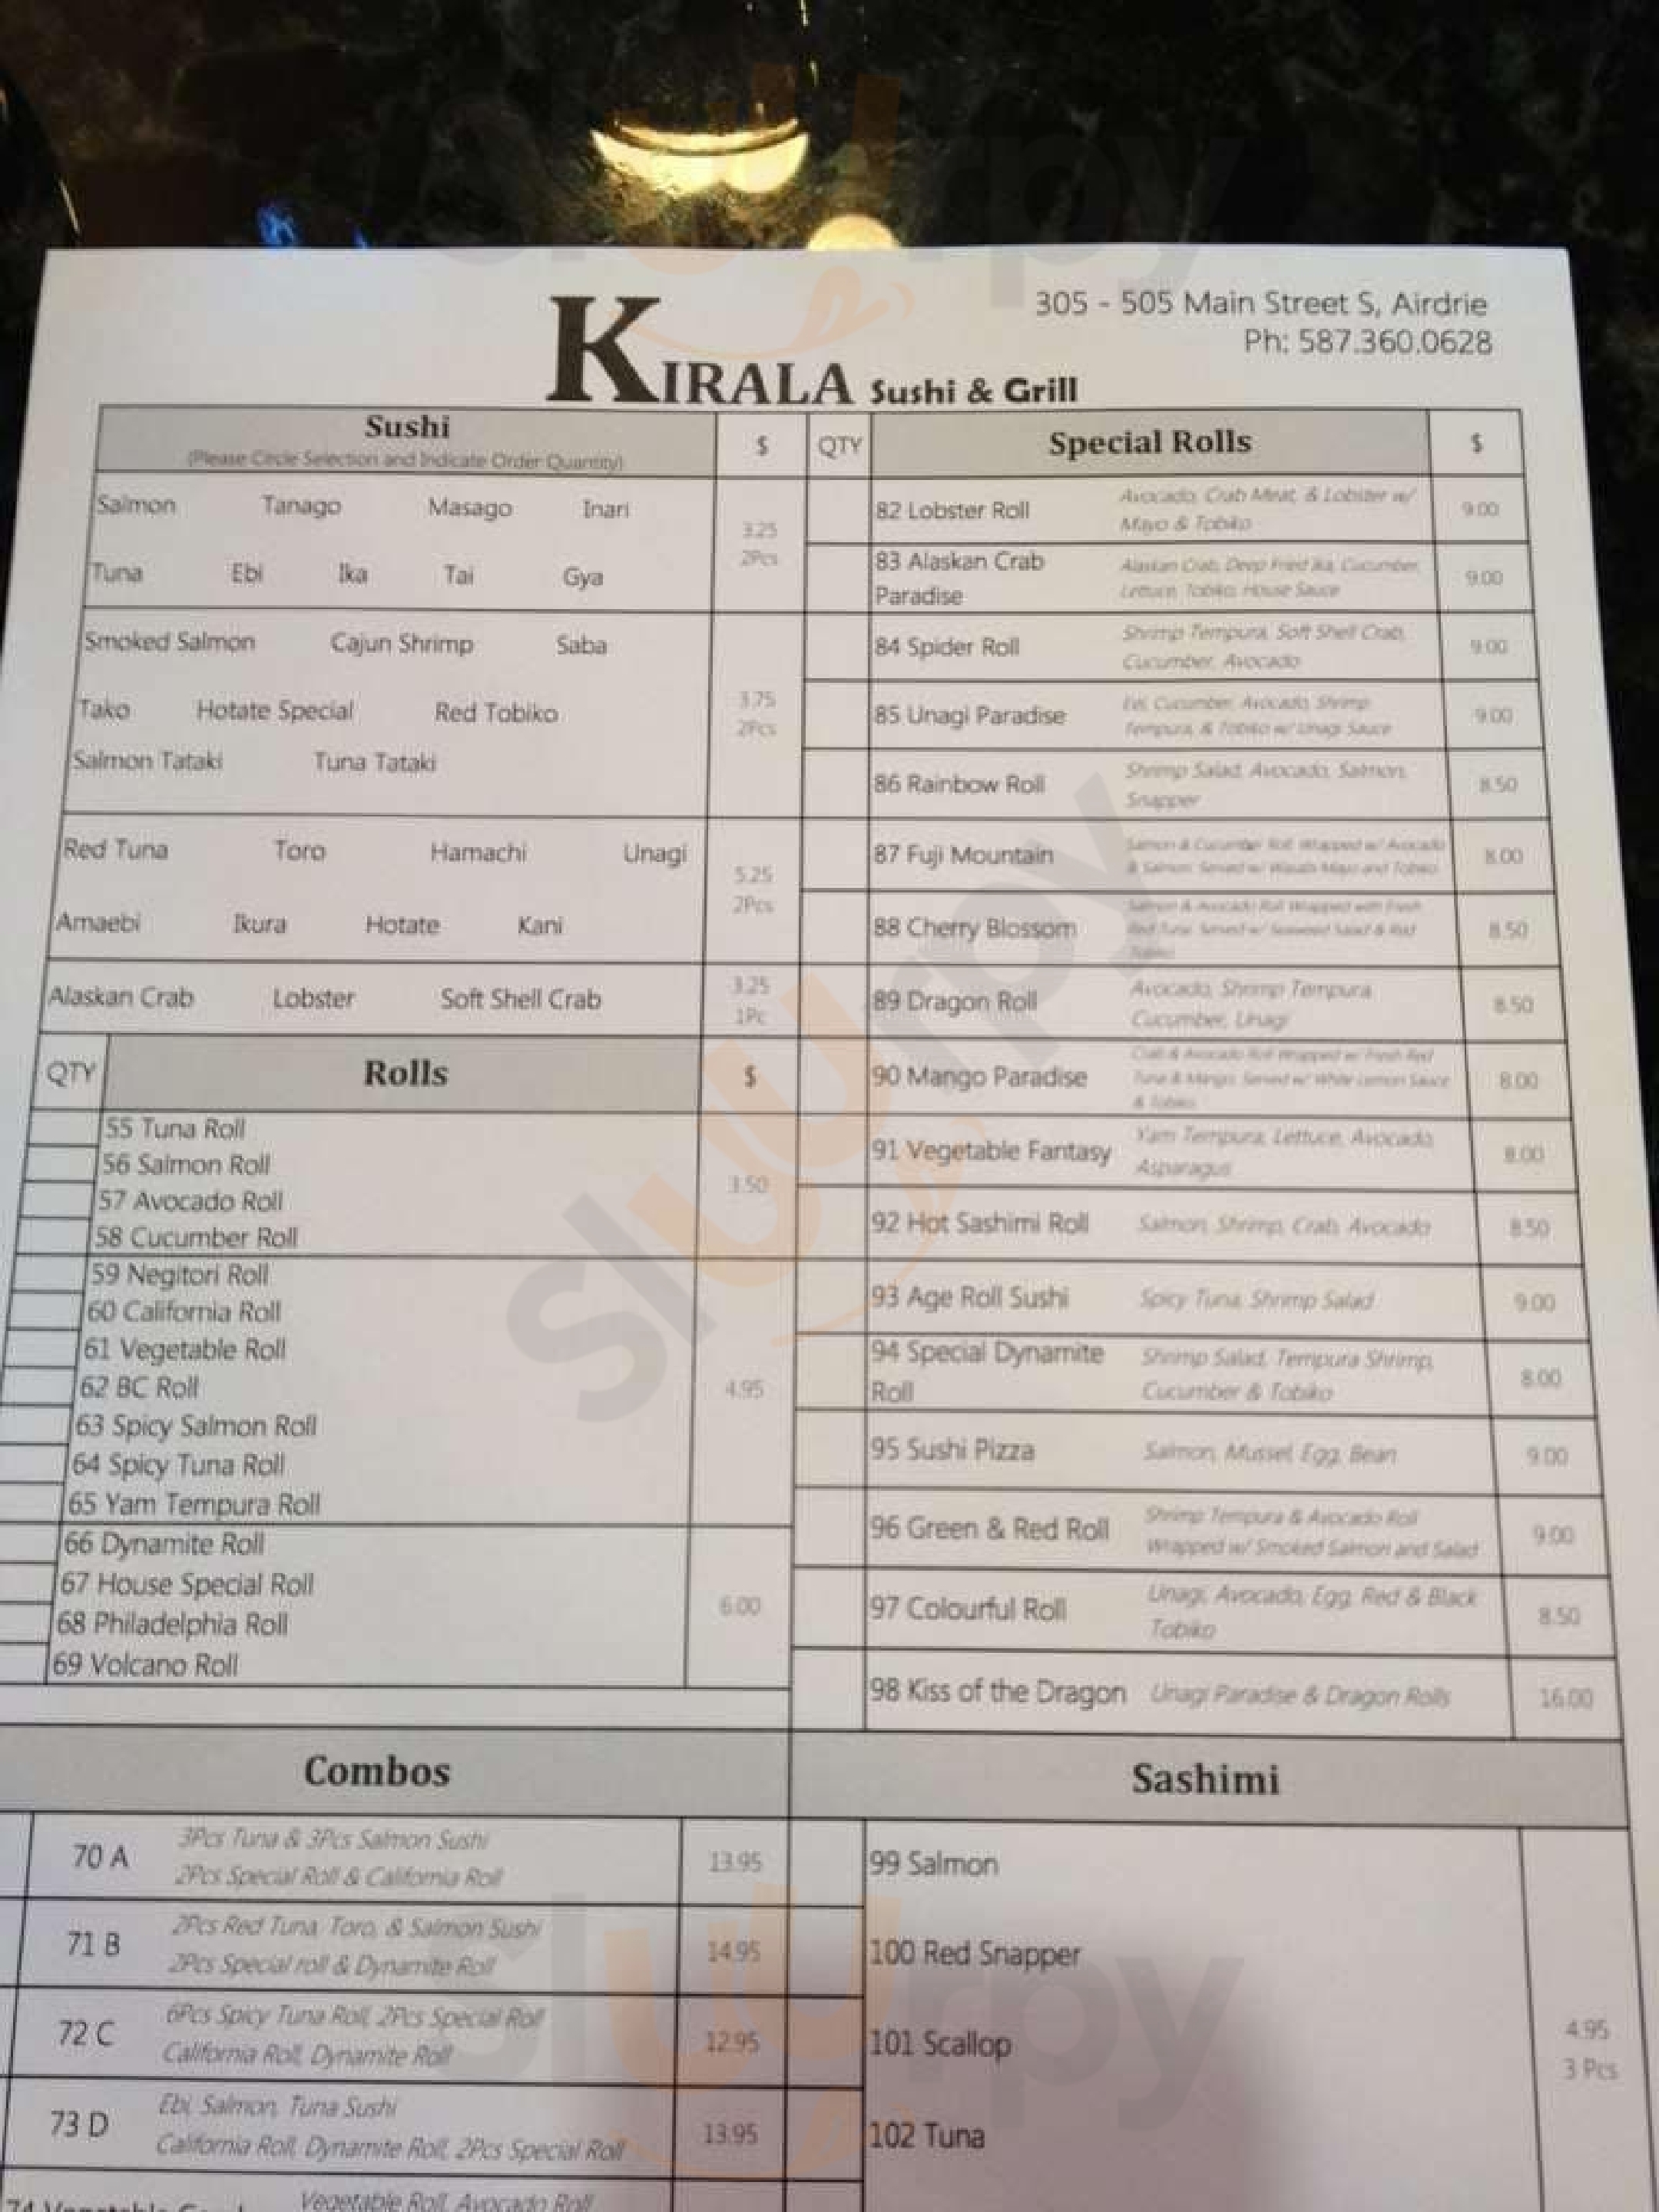 Kirala Sushi And Grill Airdrie Menu - 1